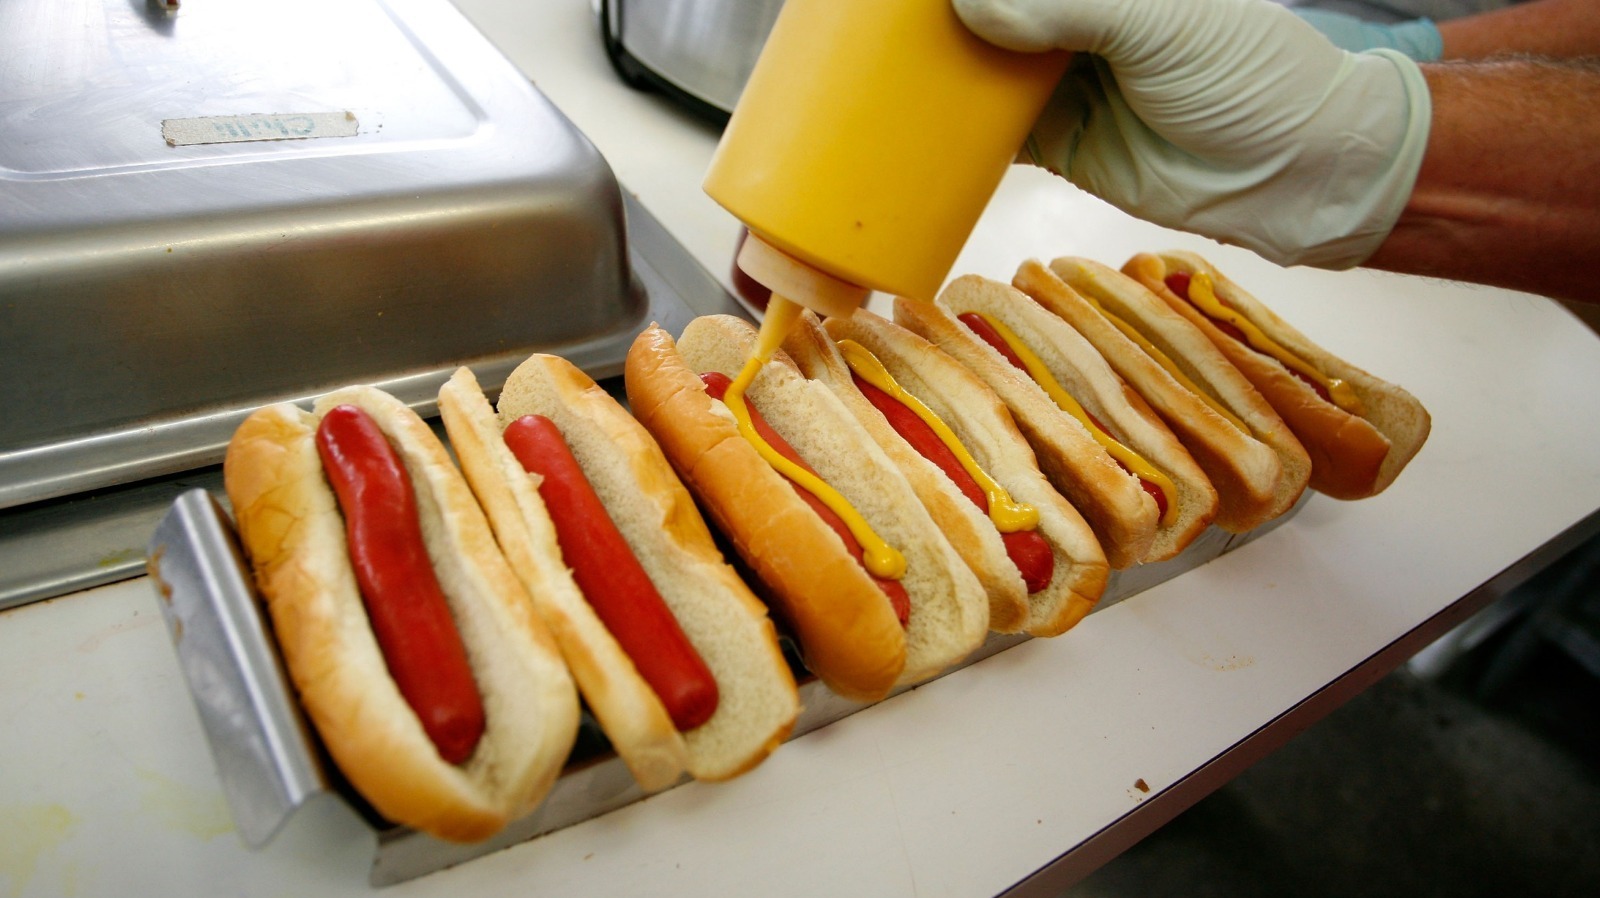 Why You Should Think Twice About Getting Concession Stand Hot Dogs